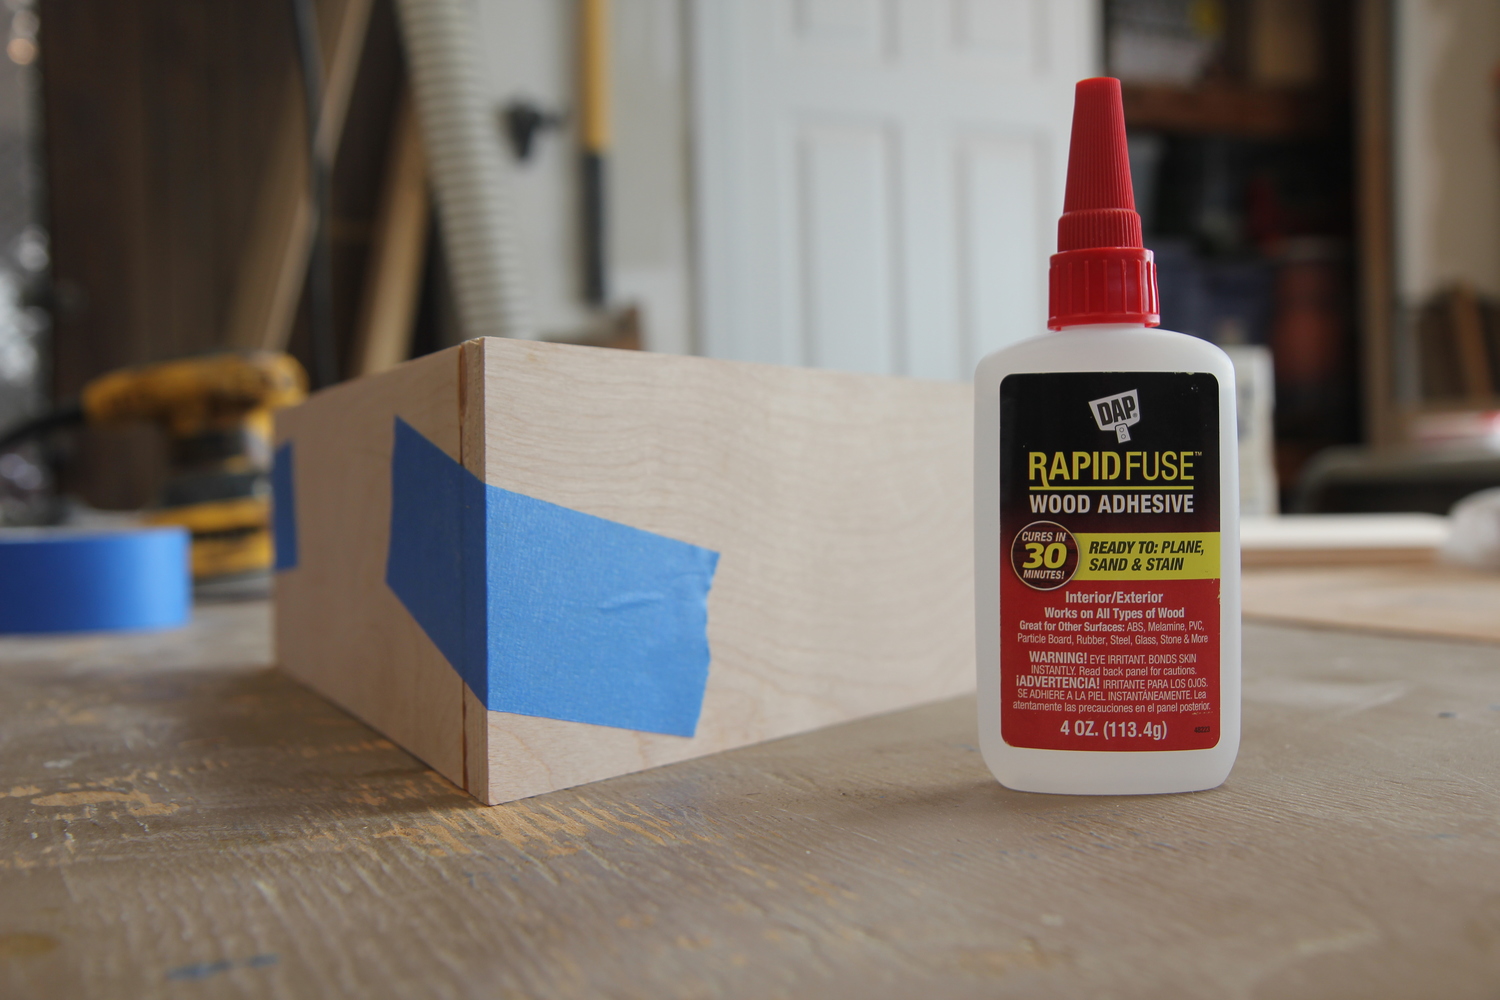 DAP's new Rapid Fuse wood adhesive. First time using it on this project and worked great.  